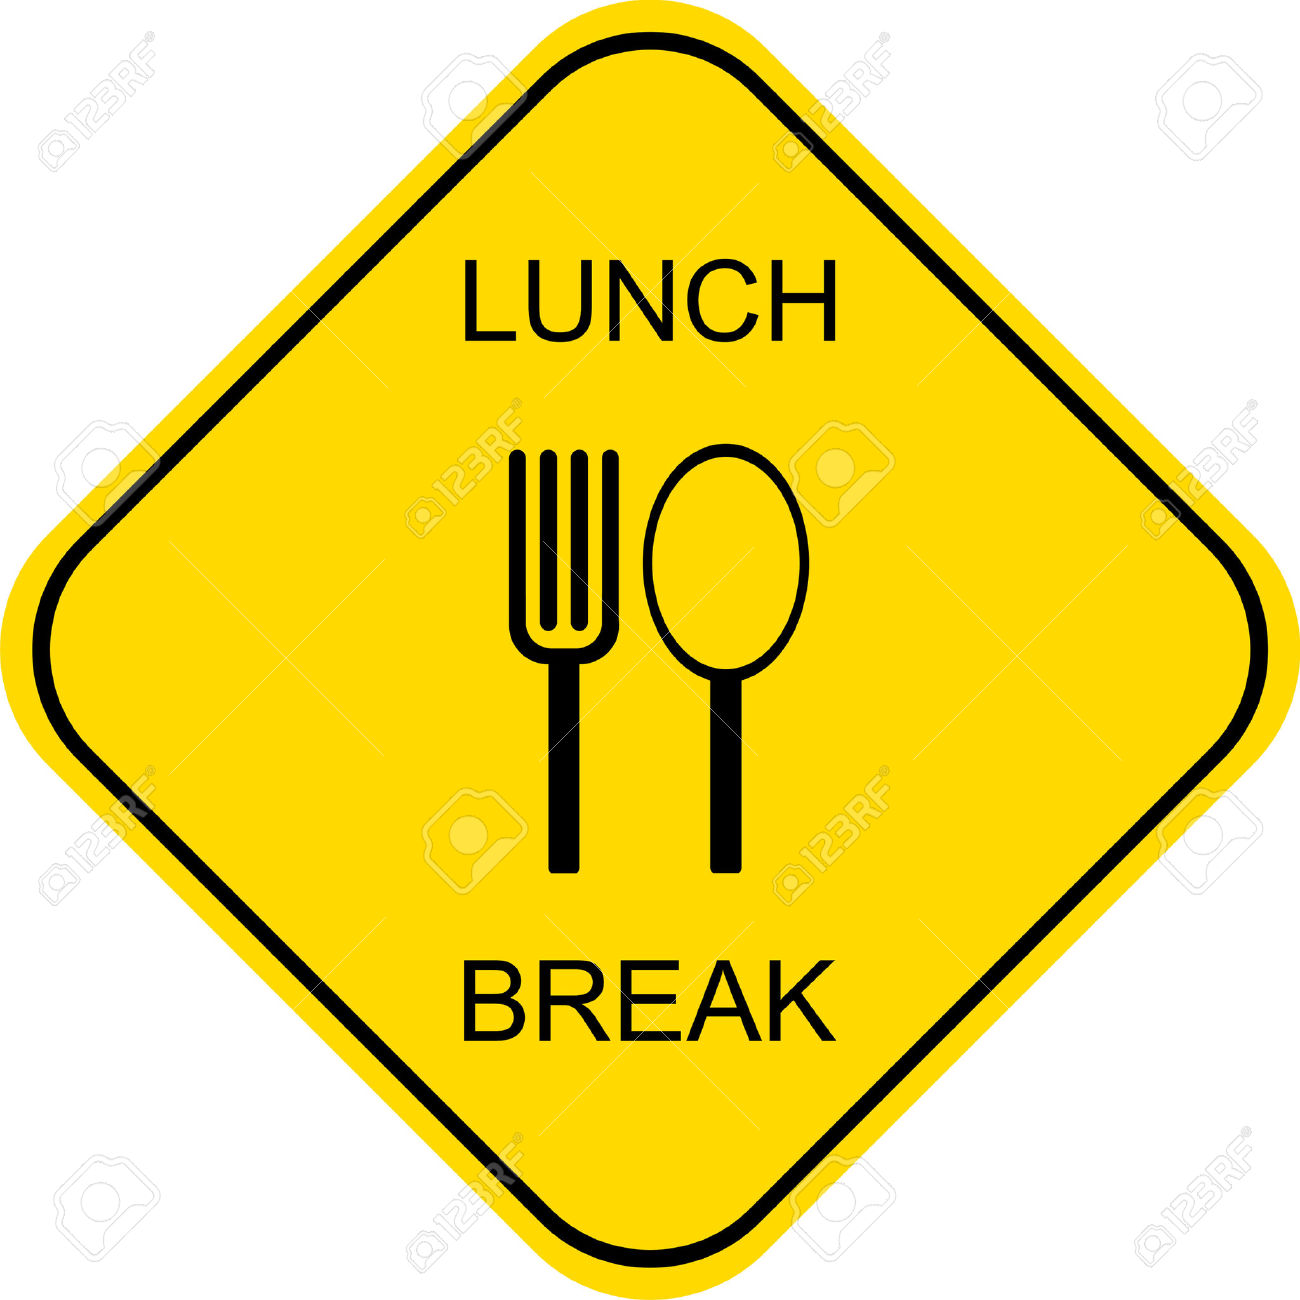 out to lunch: Lunch break. Out to lunch - vector sign.